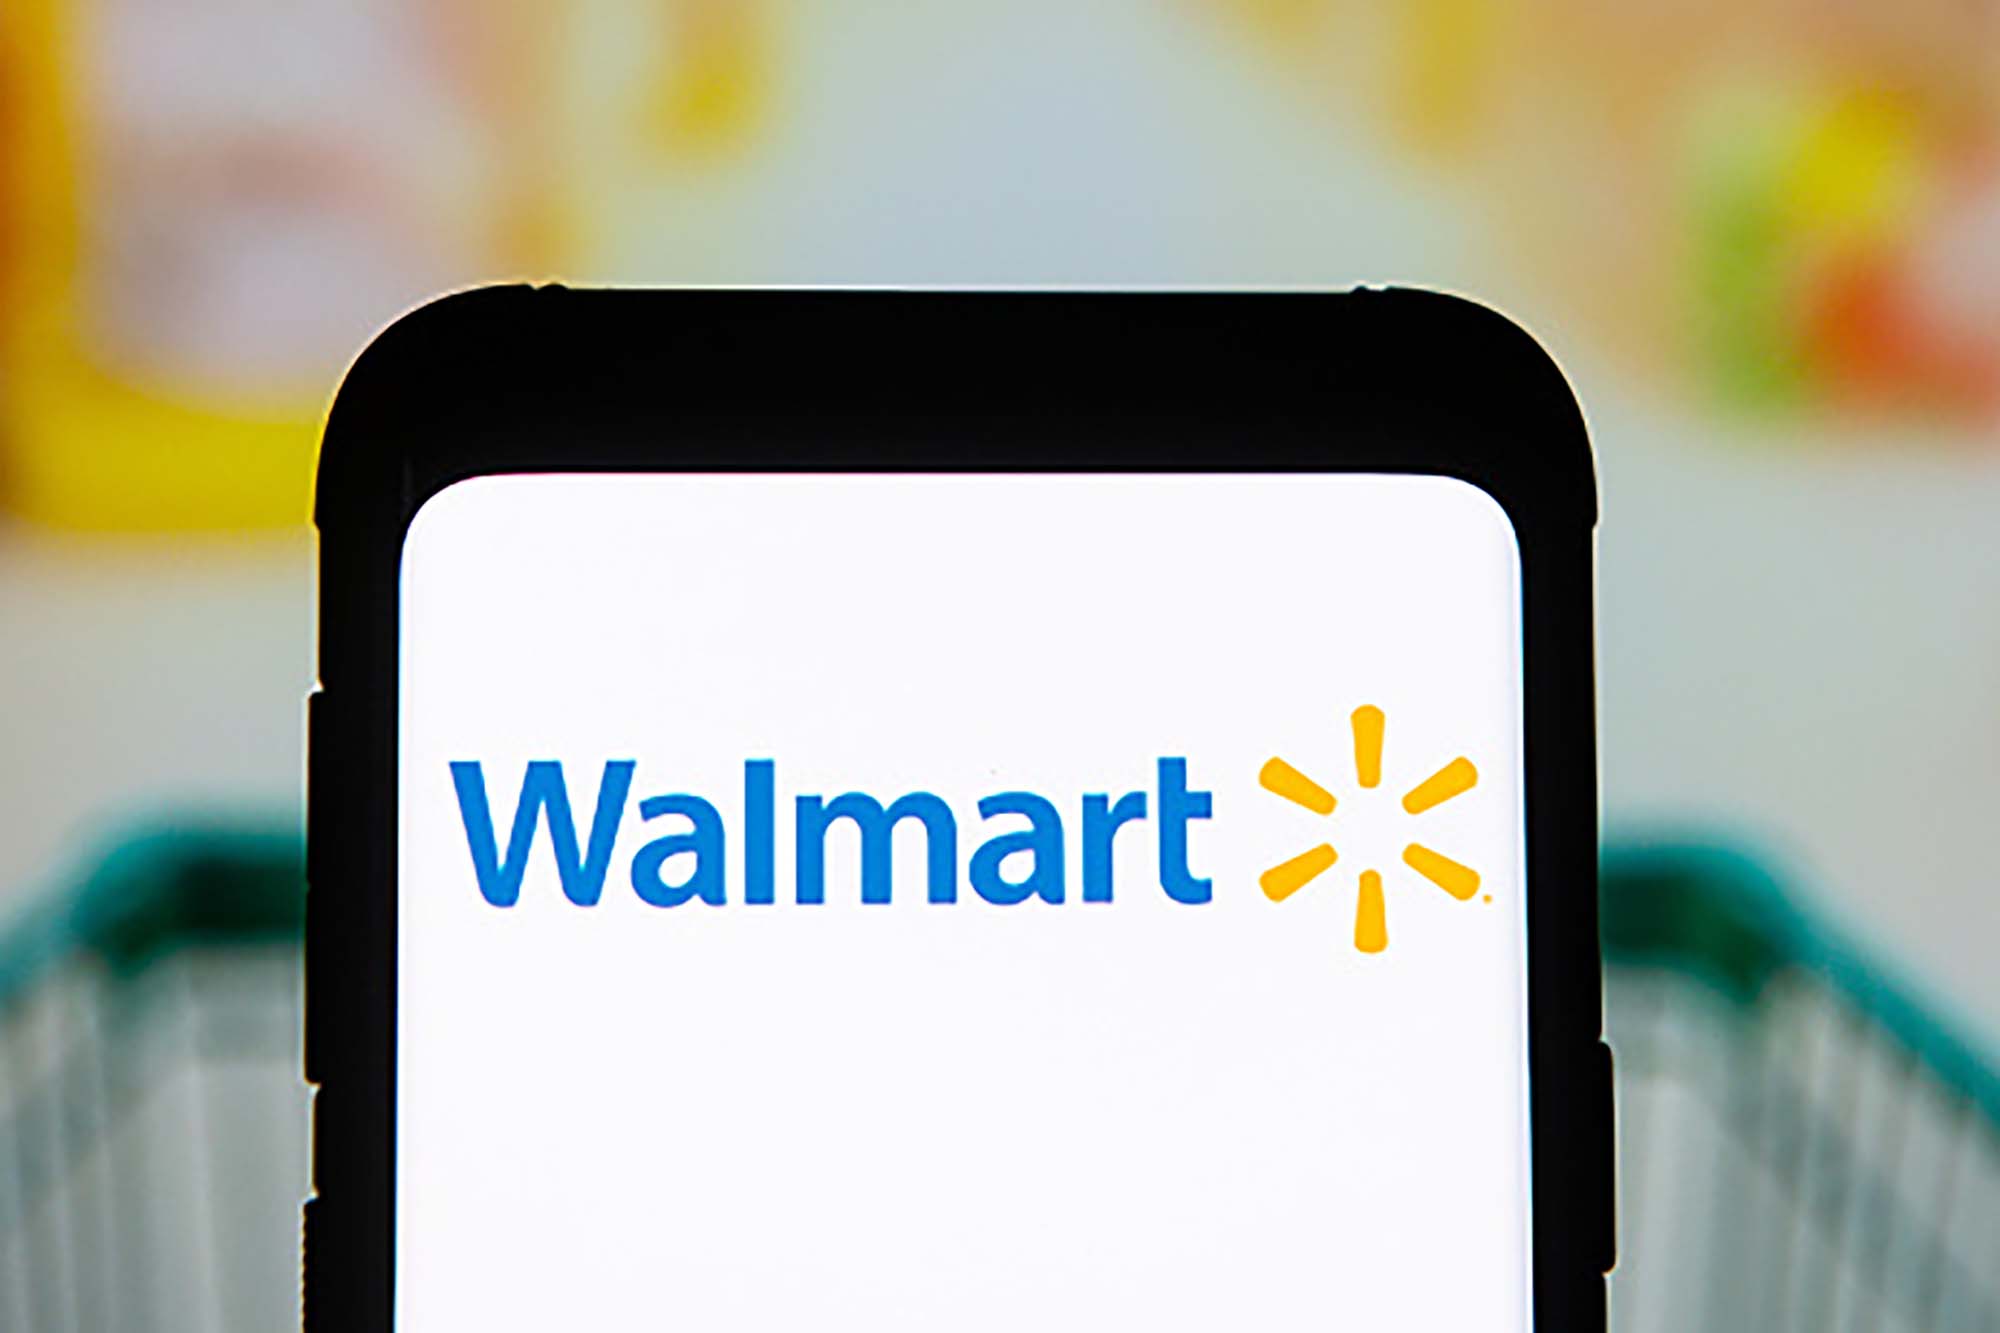 Walmart Sunless Friday 2021 deals: The 26 simplest products fair in an instant